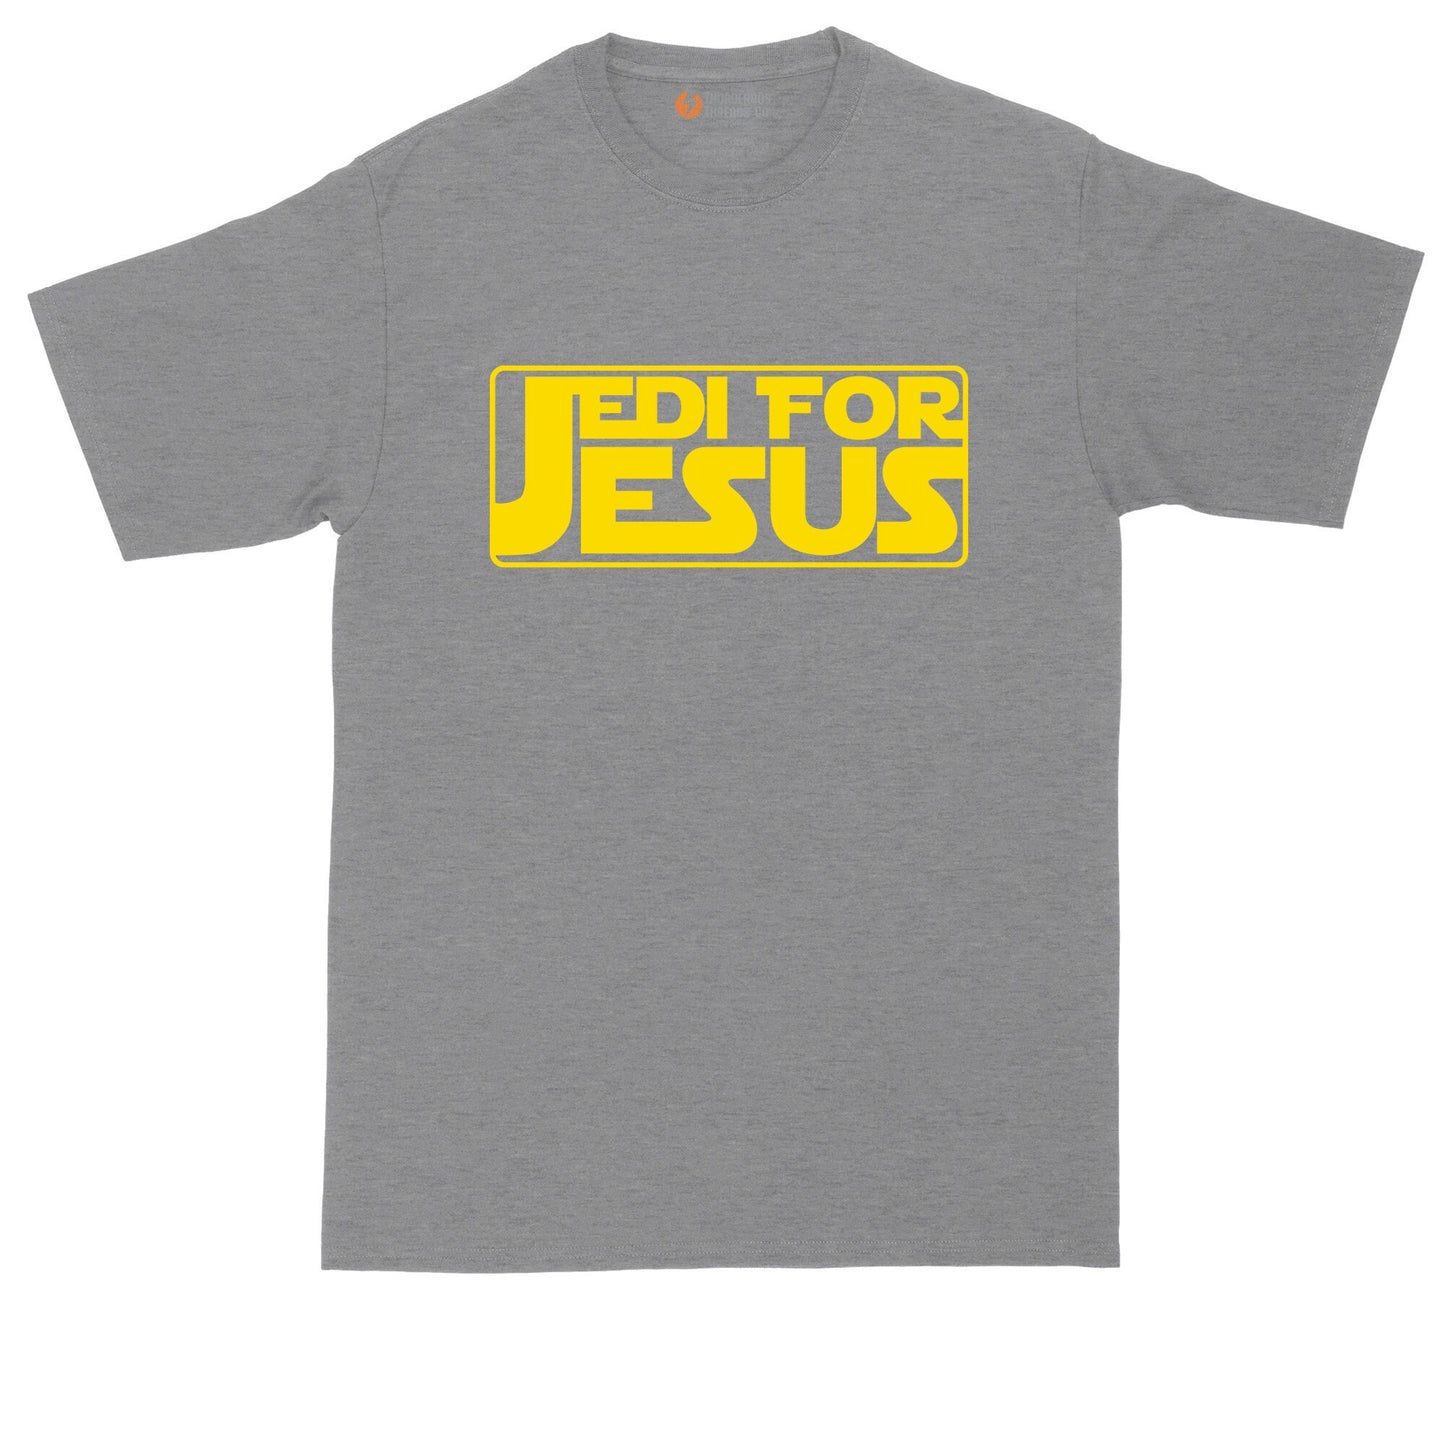 Jedi for Jesus | Funny Christian T-Shirt | Graphic T-Shirt